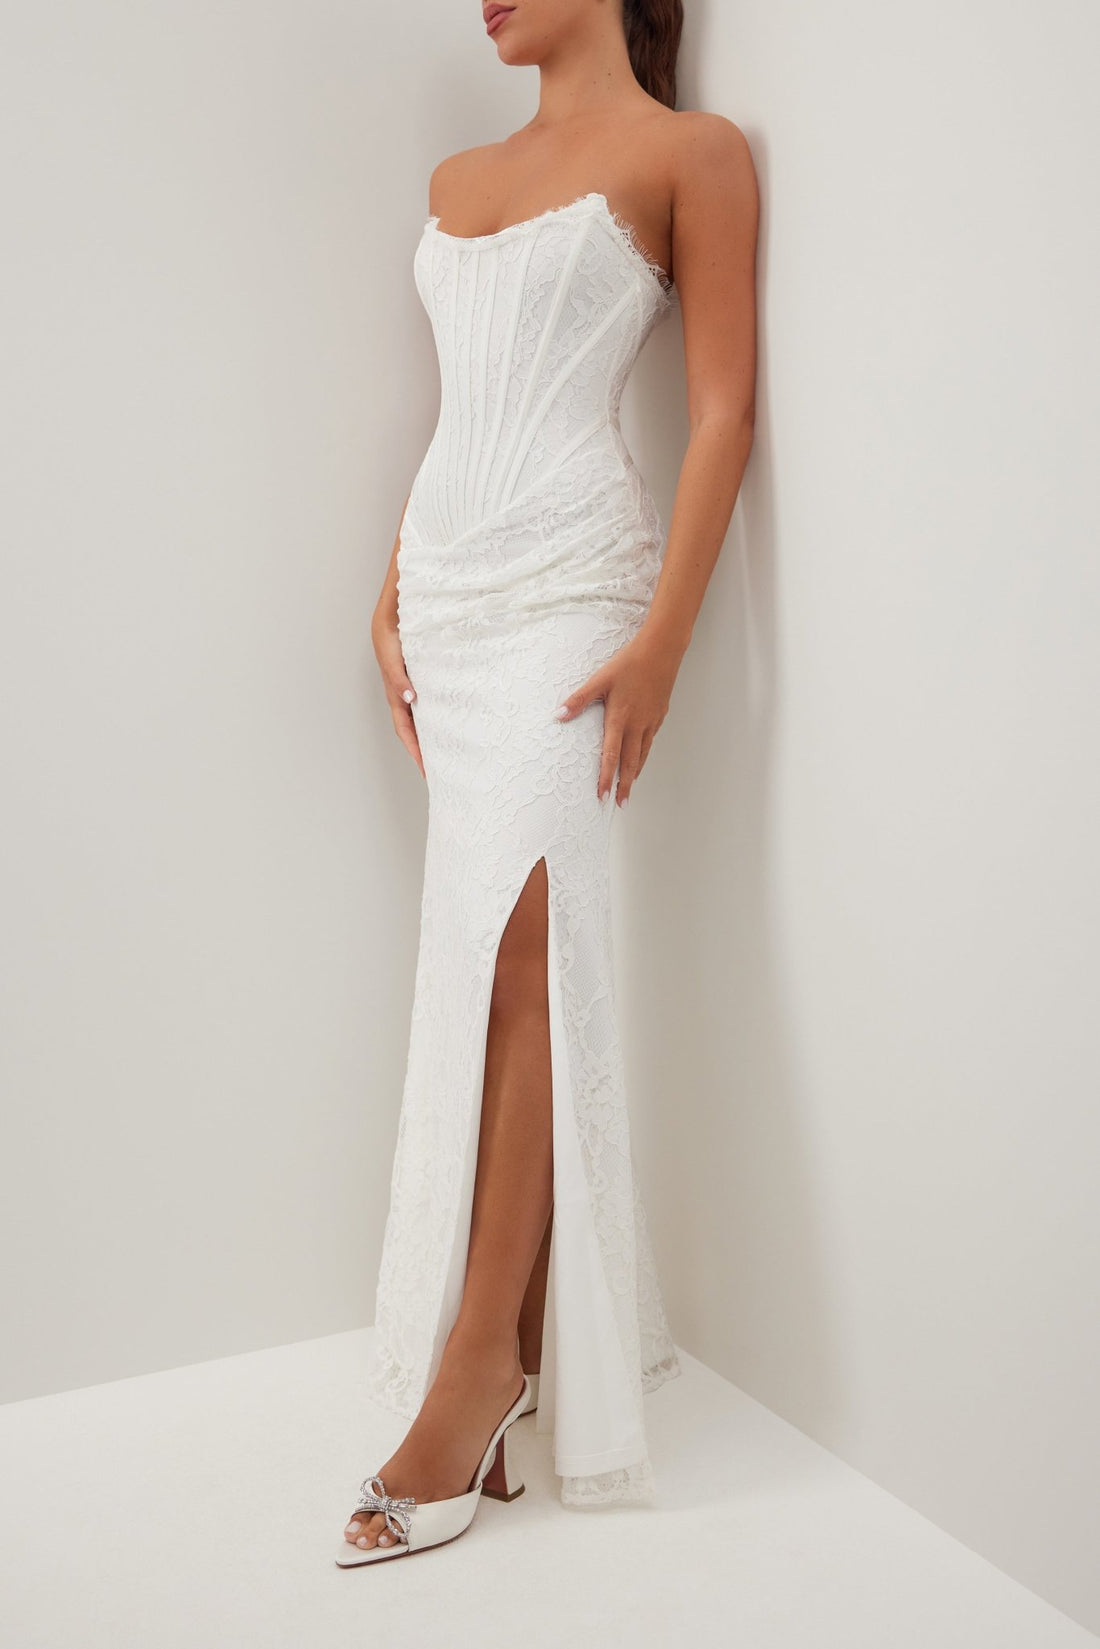 White strapless lace corset maxi dress - HEIRESS BEVERLY HILLS